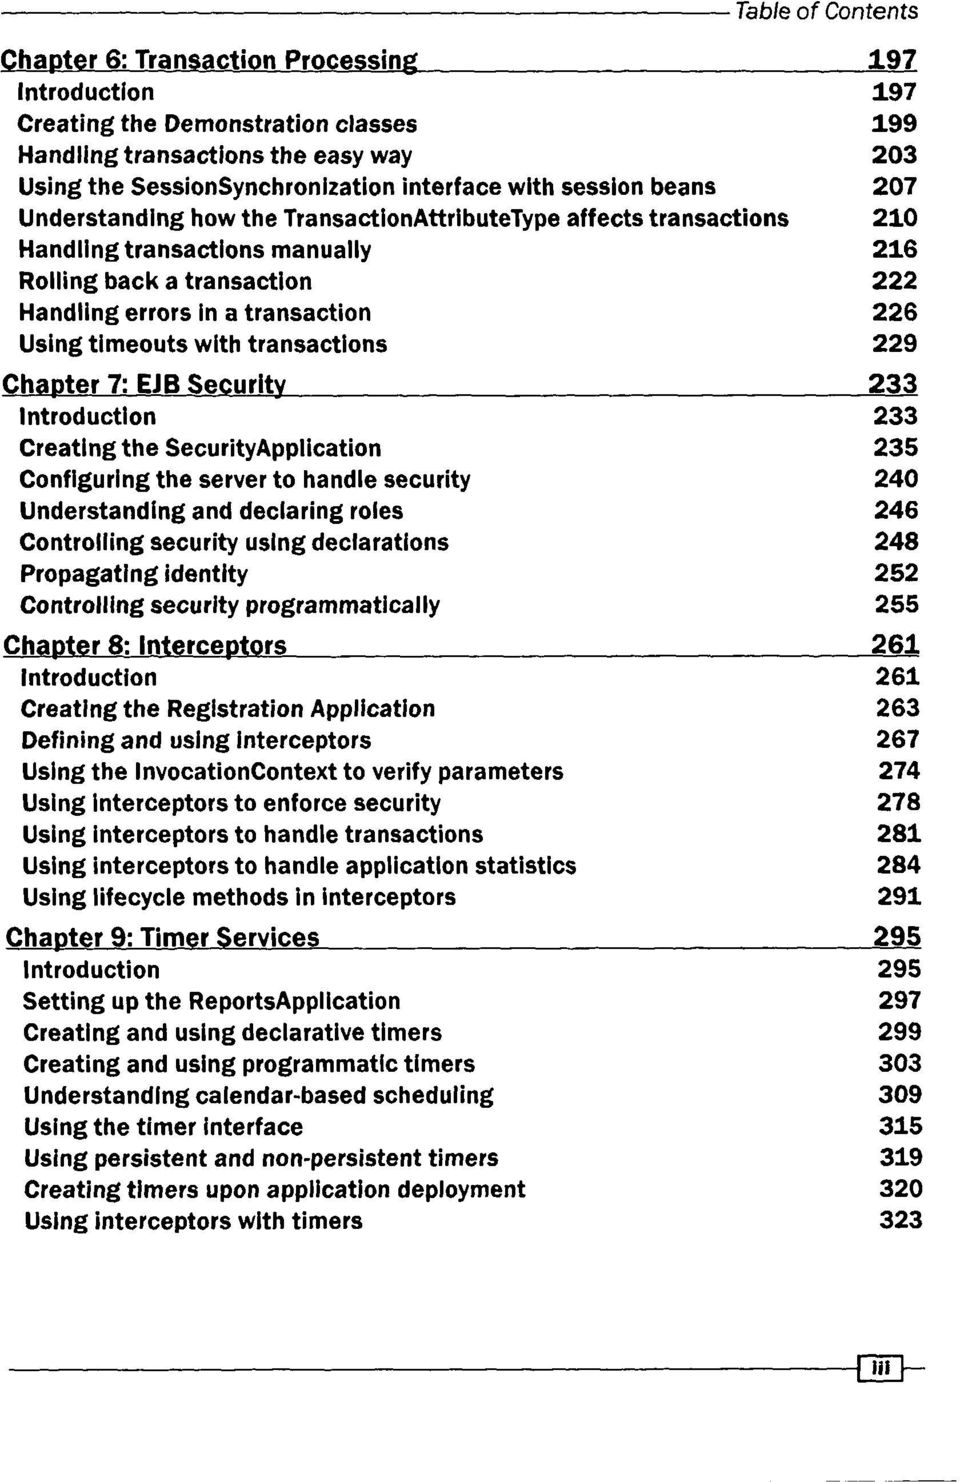 transactions 229 Chapter 7: EJB Security 233 Introduction 233 Creating the SecurityApplication 235 Configuring the server to handle security 240 Understanding and declaring roles 246 Controlling